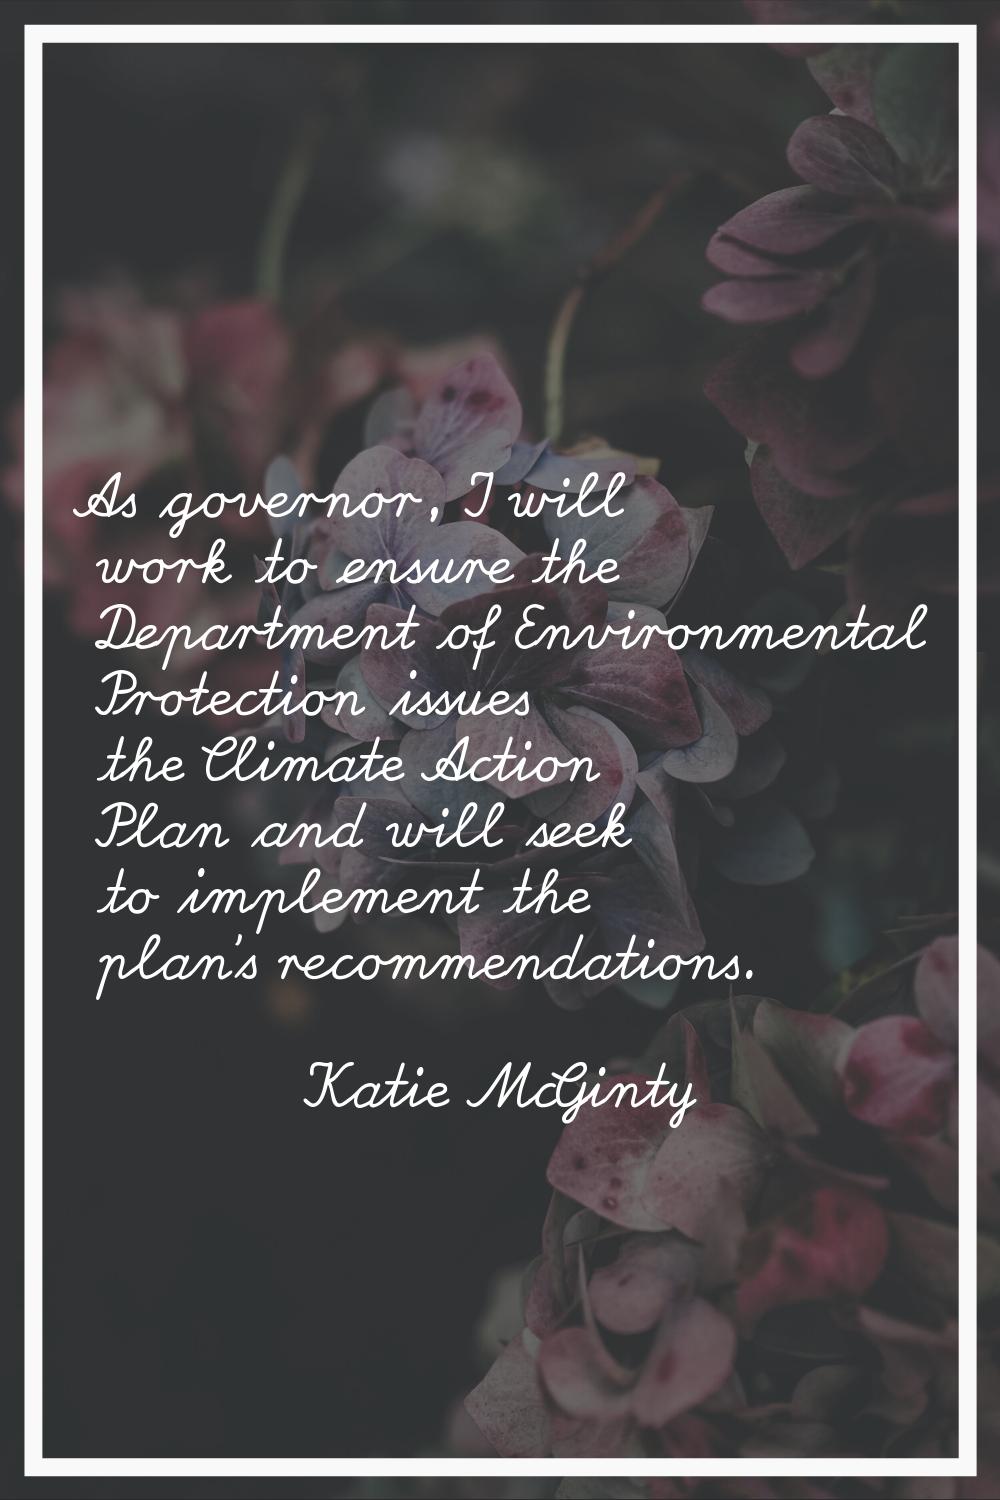 As governor, I will work to ensure the Department of Environmental Protection issues the Climate Ac